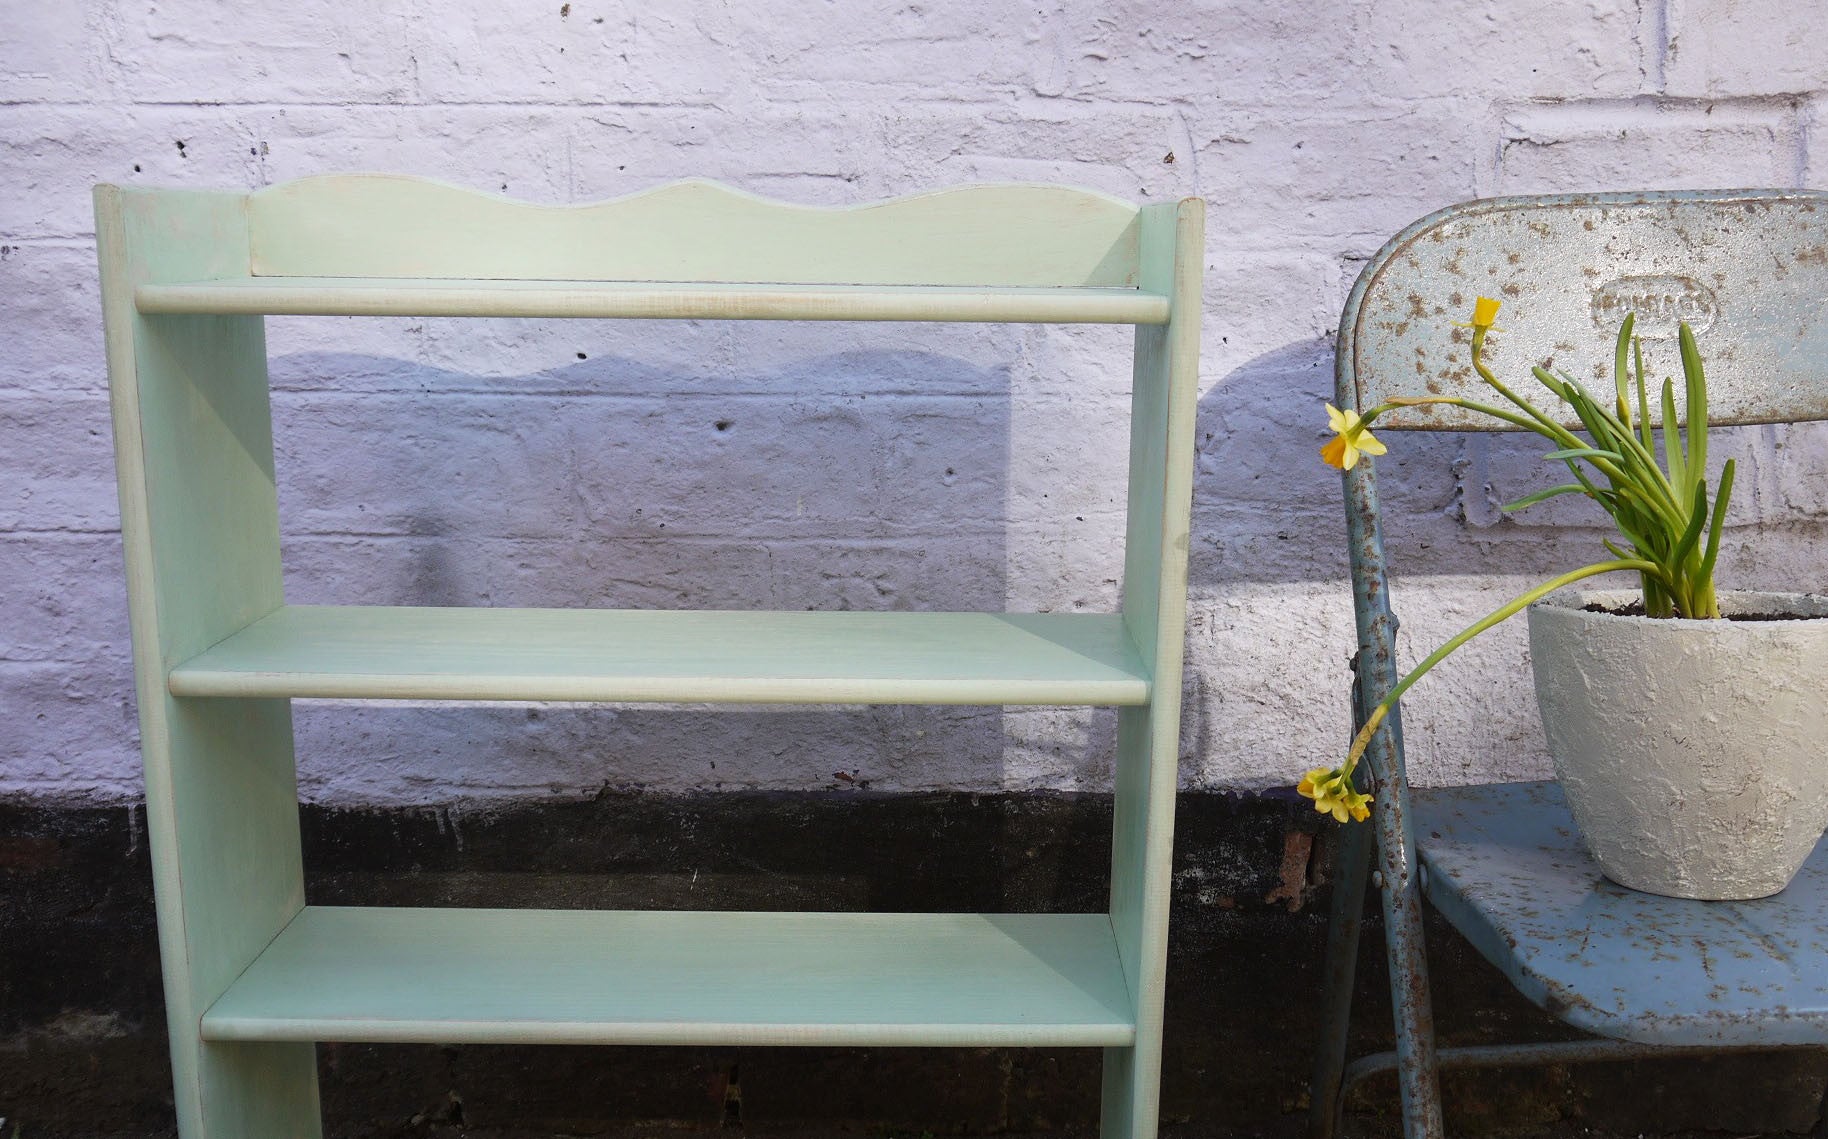 Vintage painted mint green wooden wall shelf, perfect for the kitchen - free UK shipping